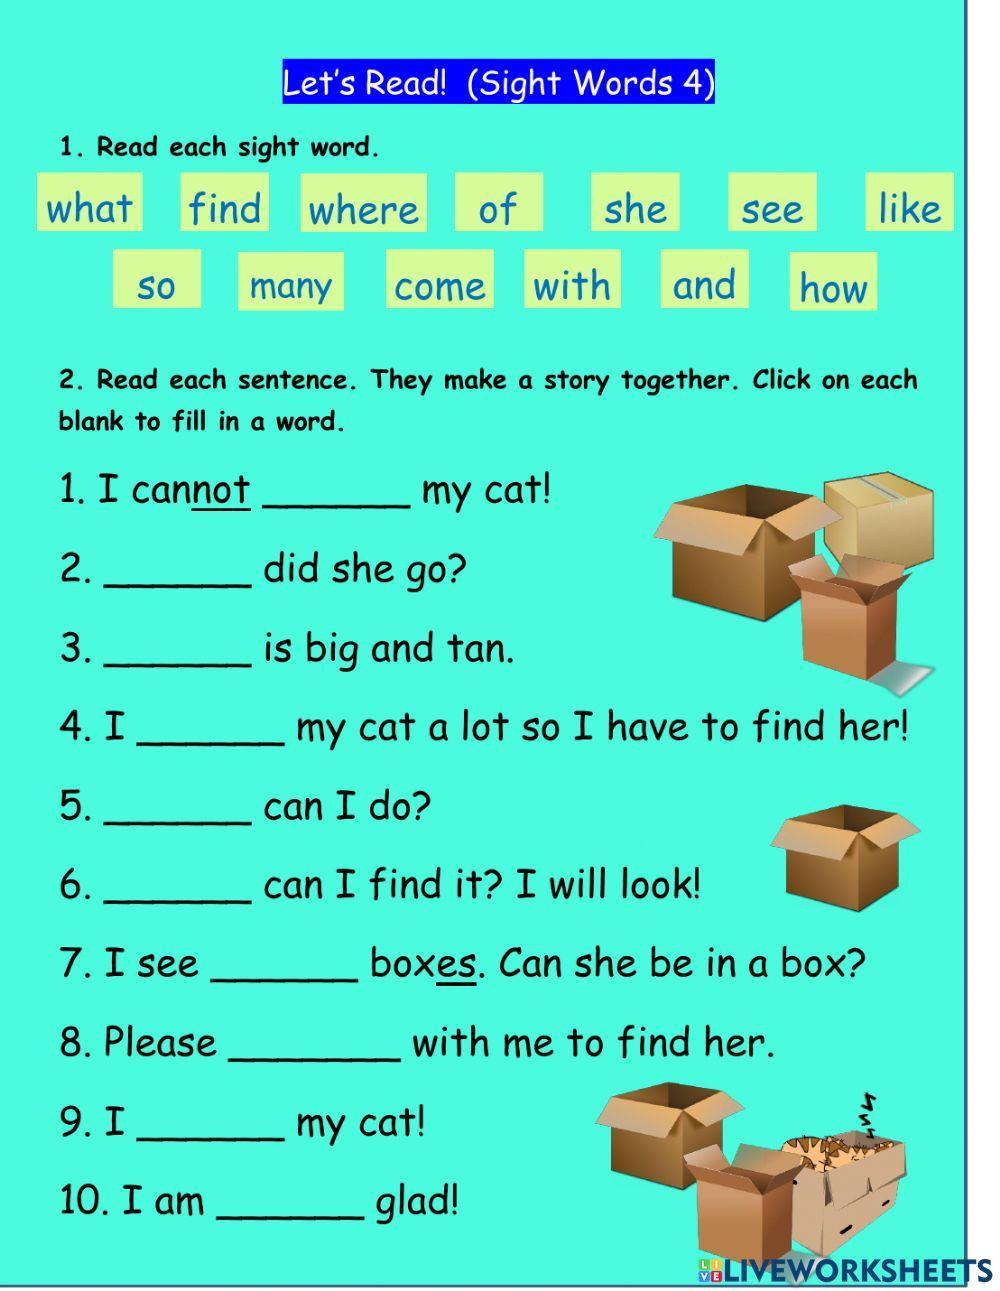 Let's Read Sight Words Story